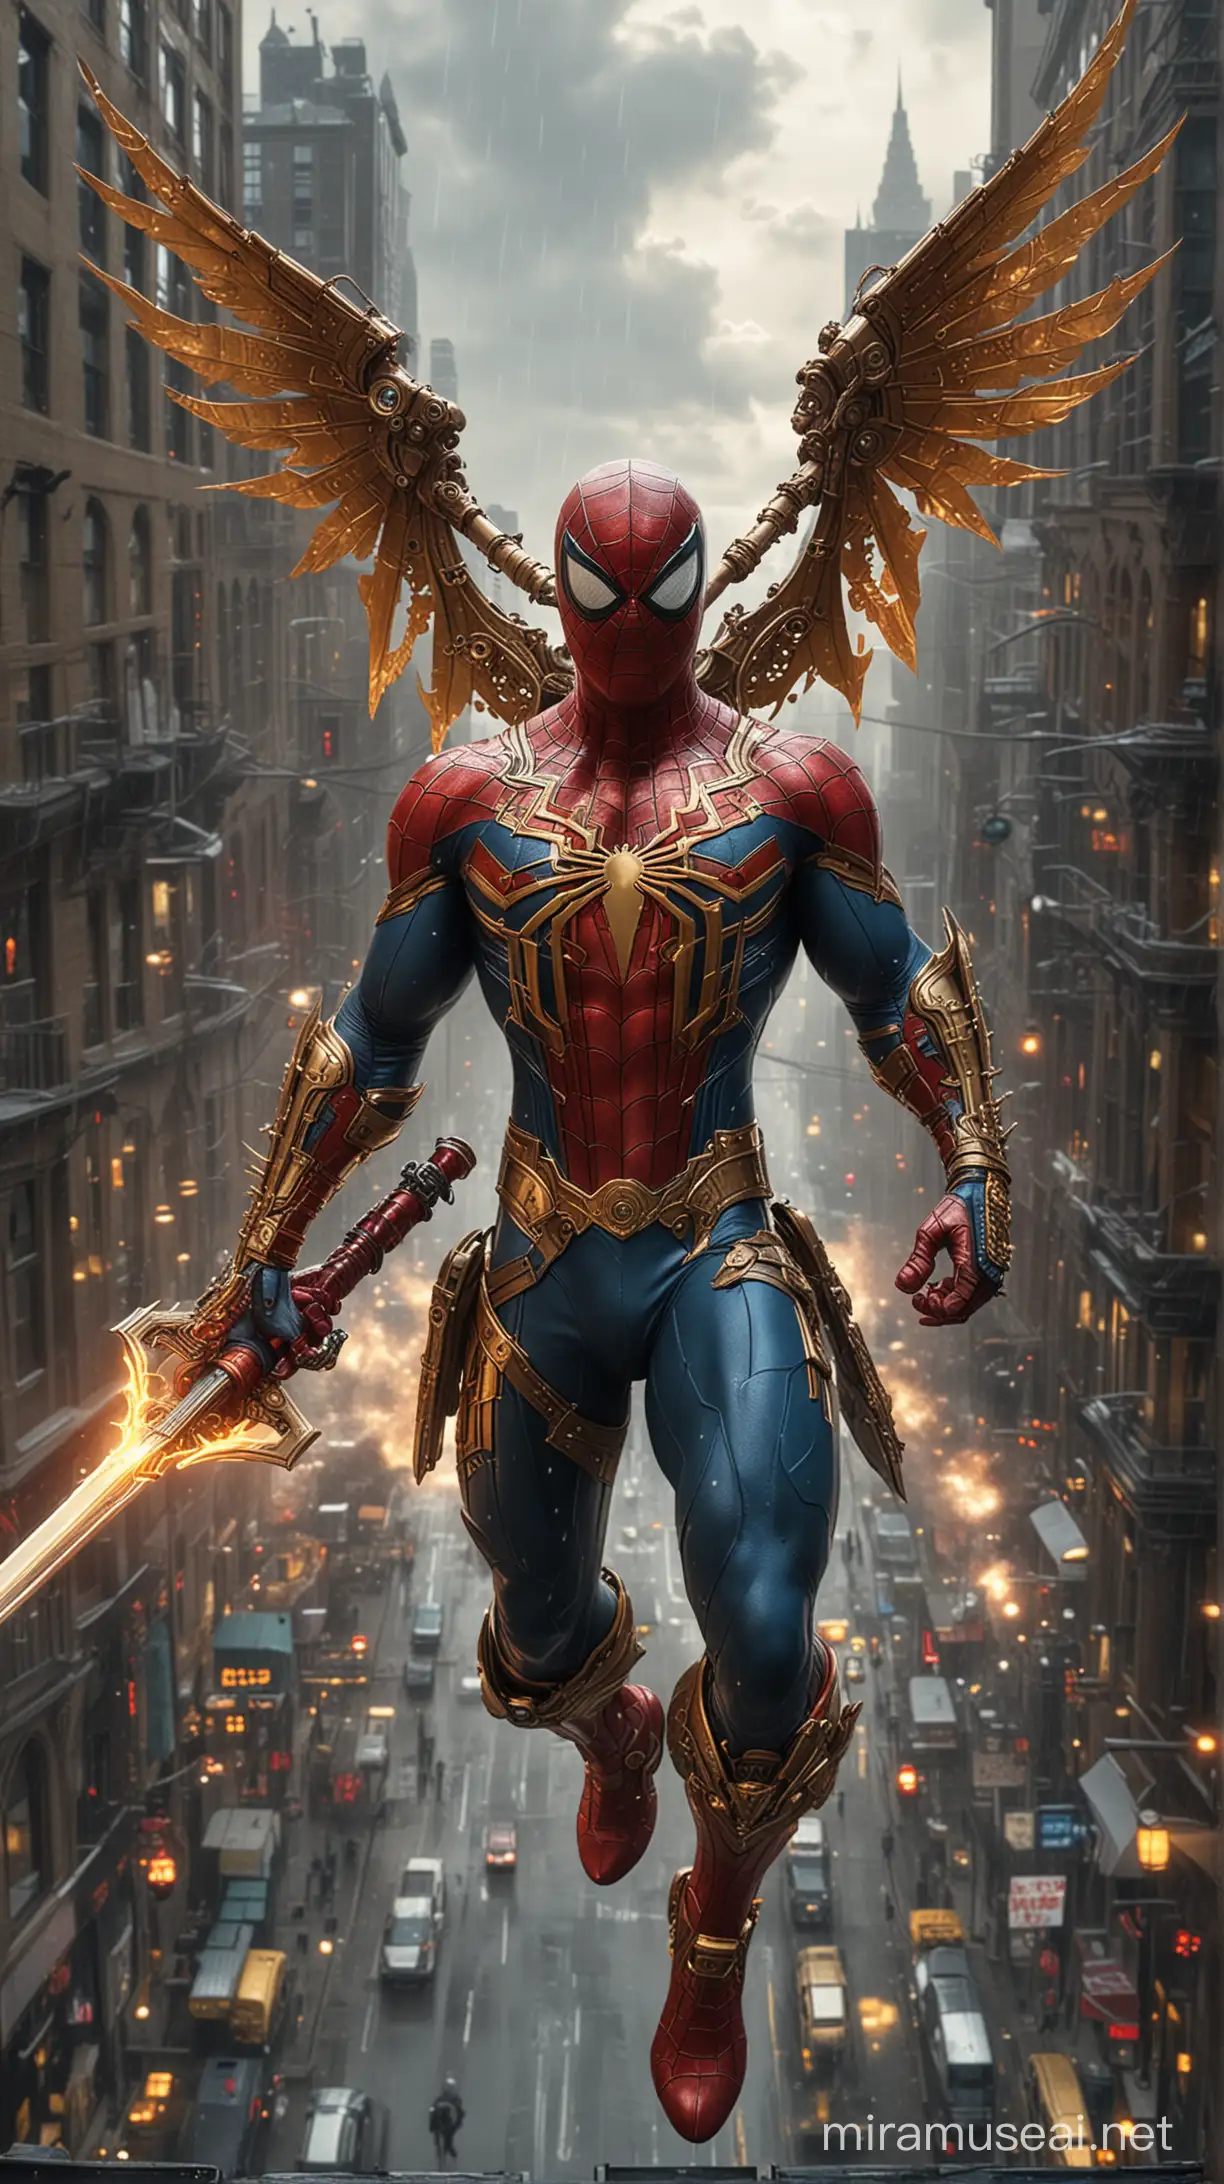 Steampunk Spiderman Soars Over Cityscape with Flaming Wings and Glowing Sword